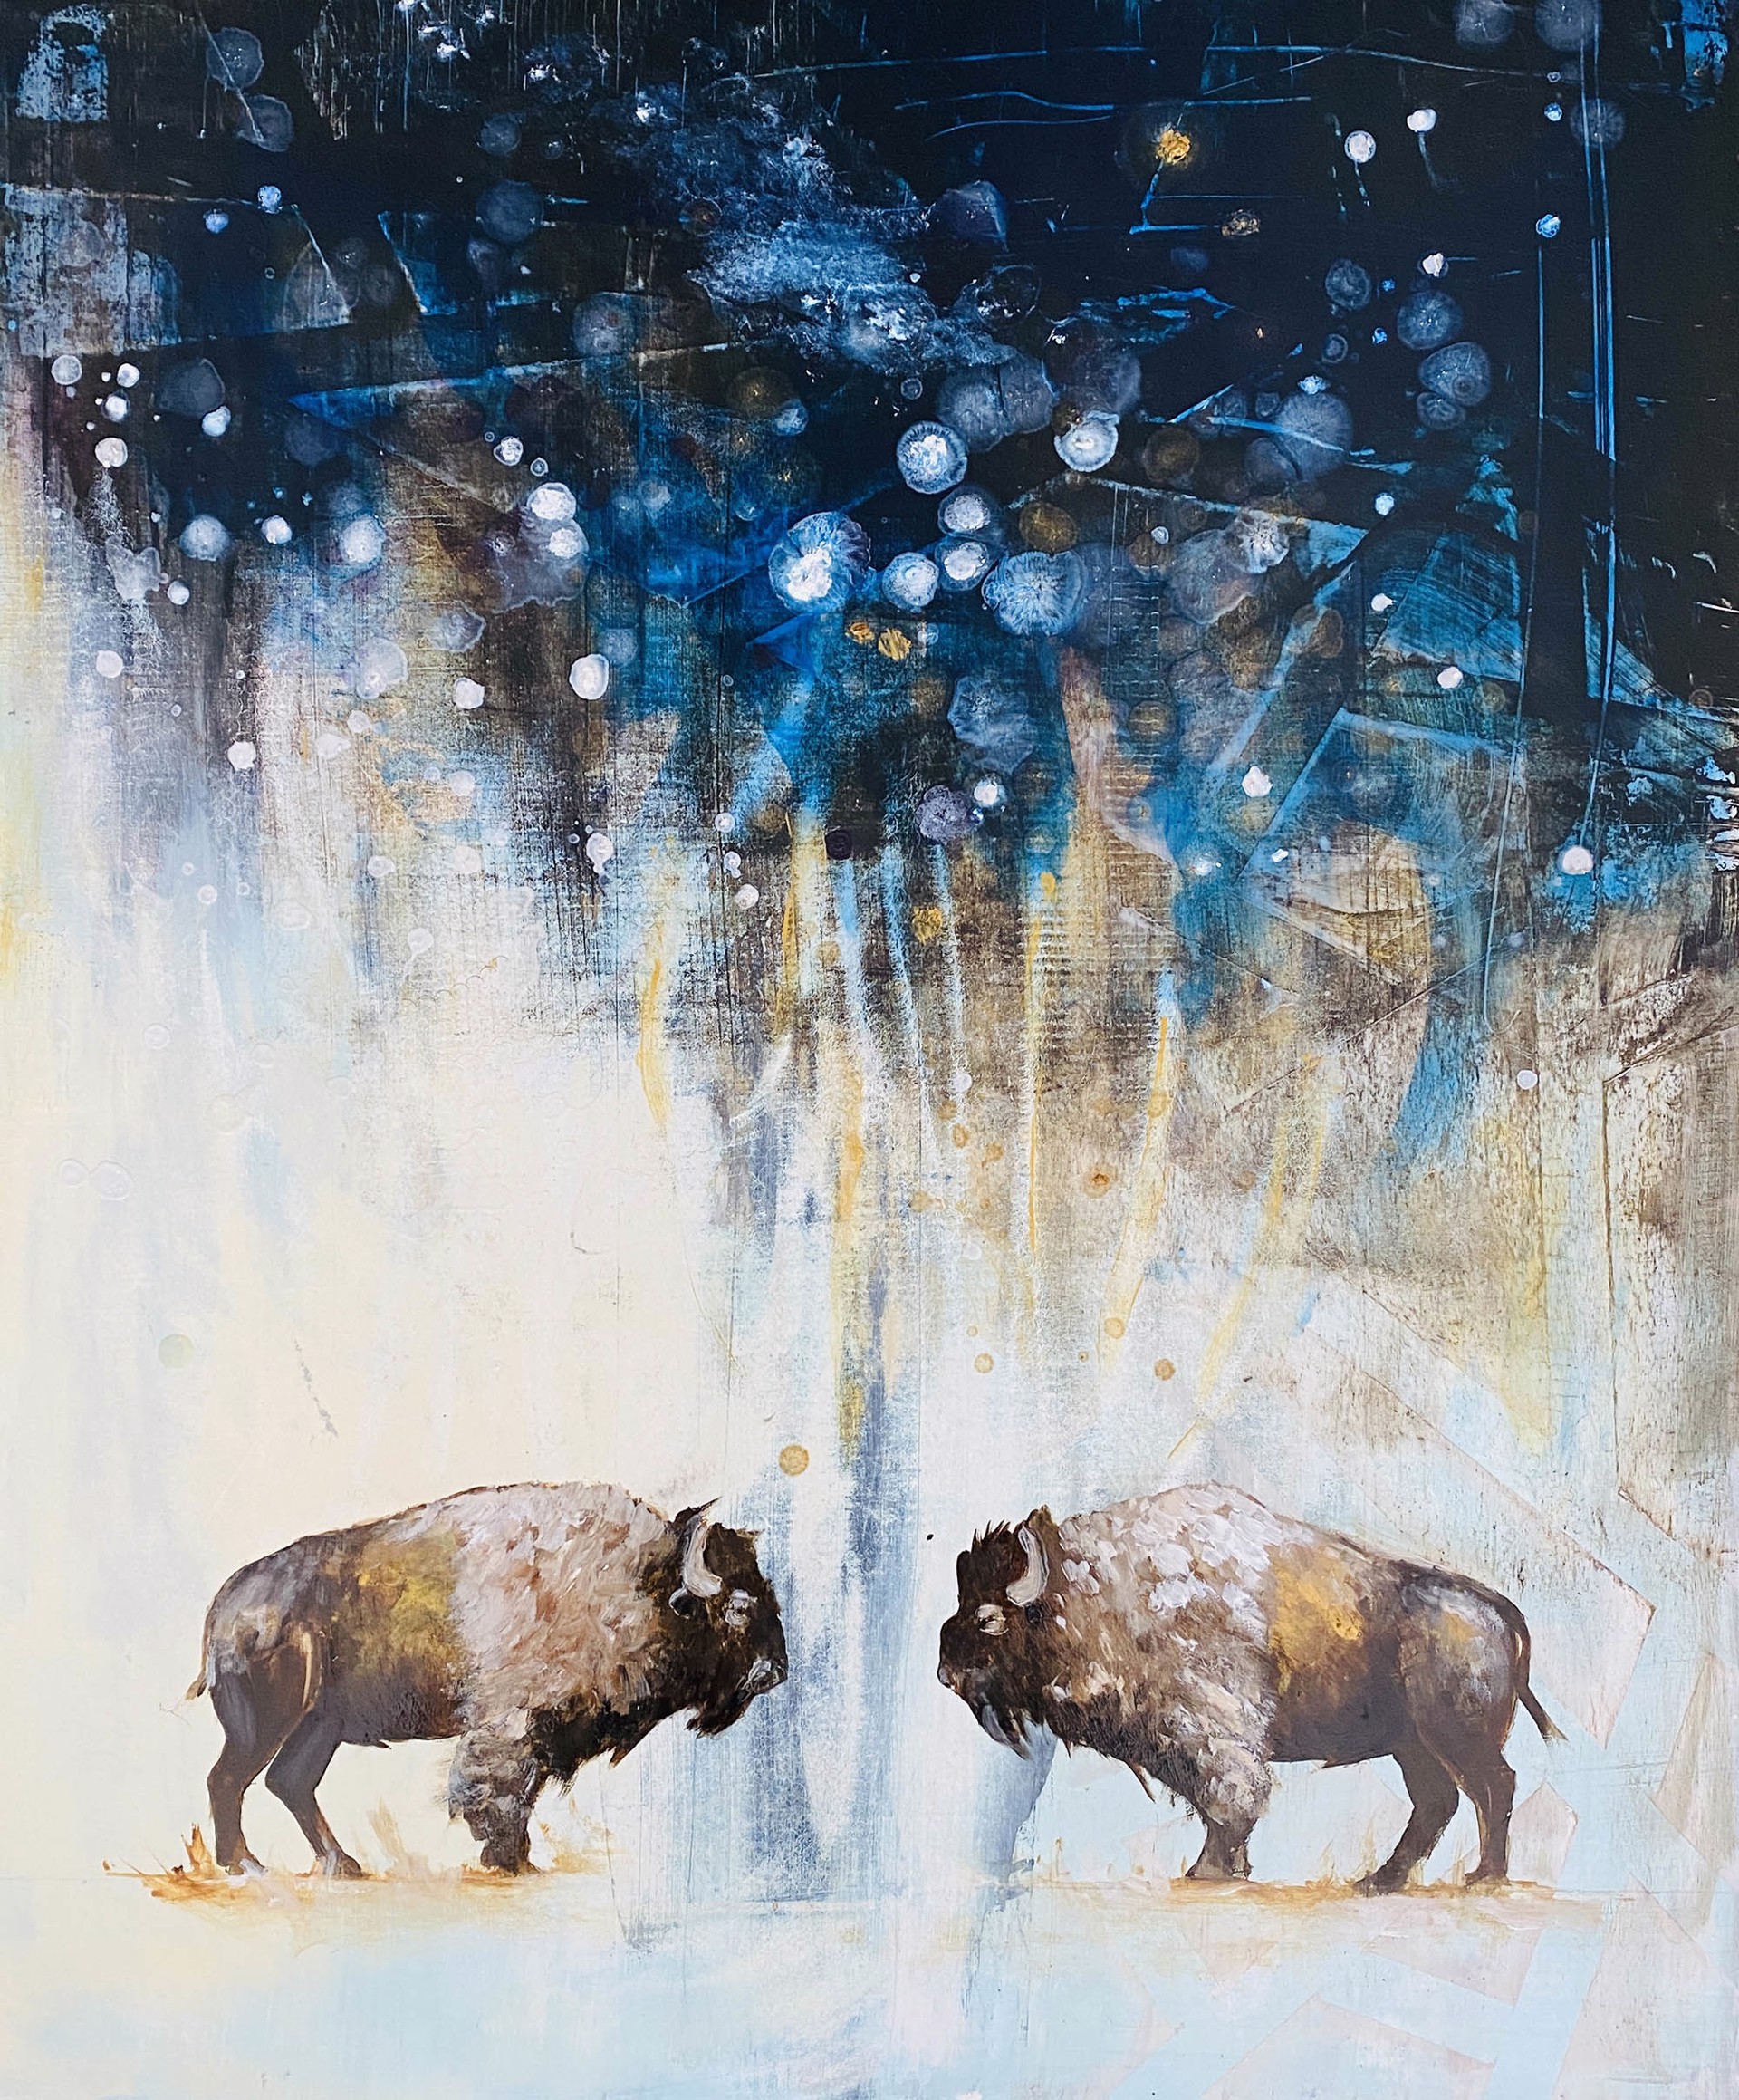 Original Oil Painting Featuring Two Bison Facing Each Other With Starry Night Sky Fading Into Abstracted Background